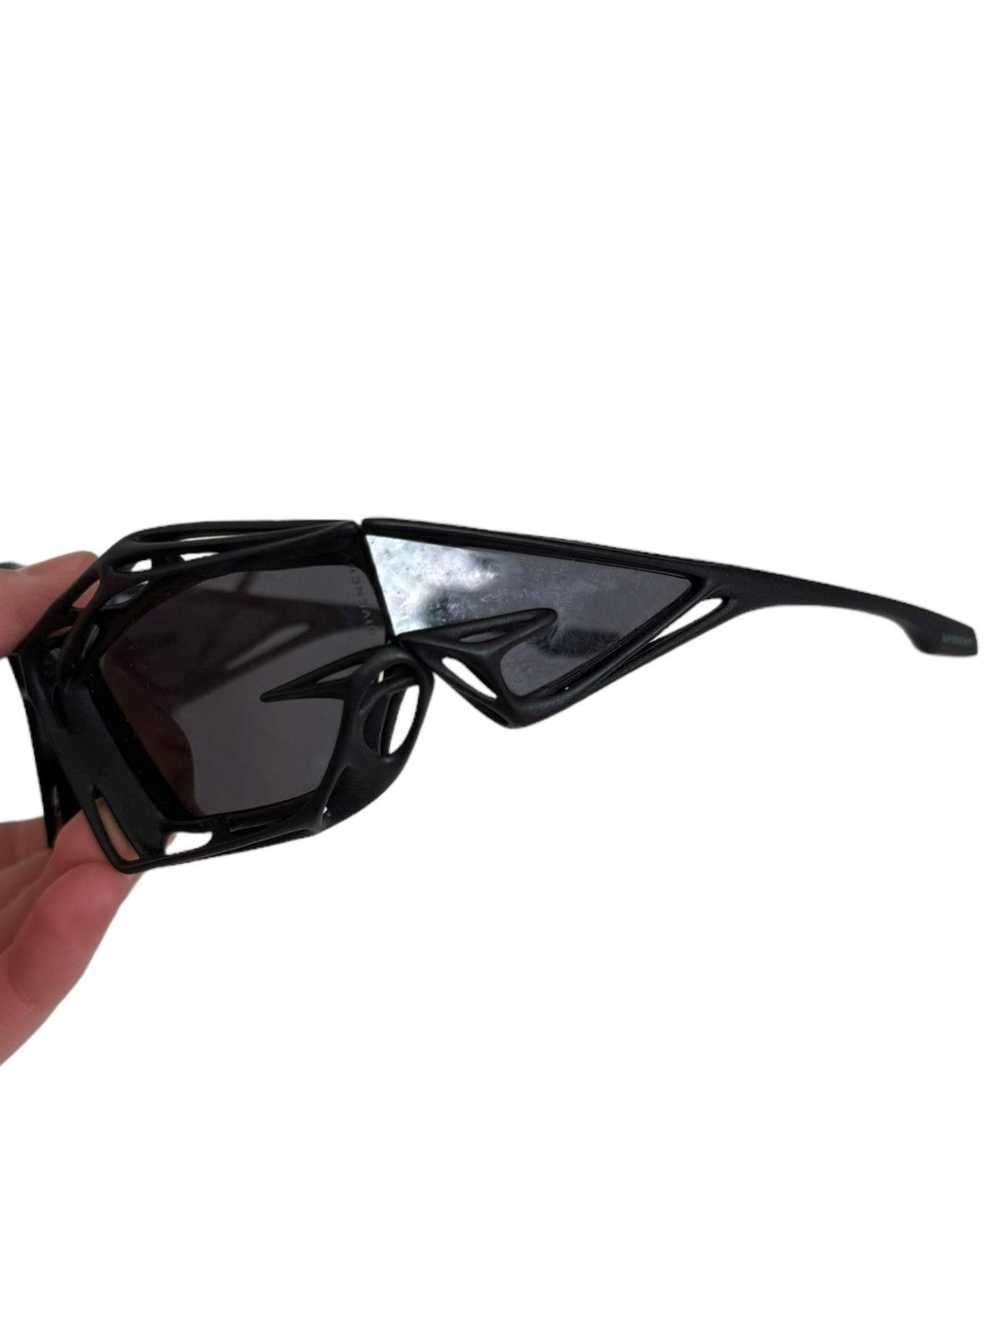 Givenchy 3D Print Cut Cage Sunglasses - image 3